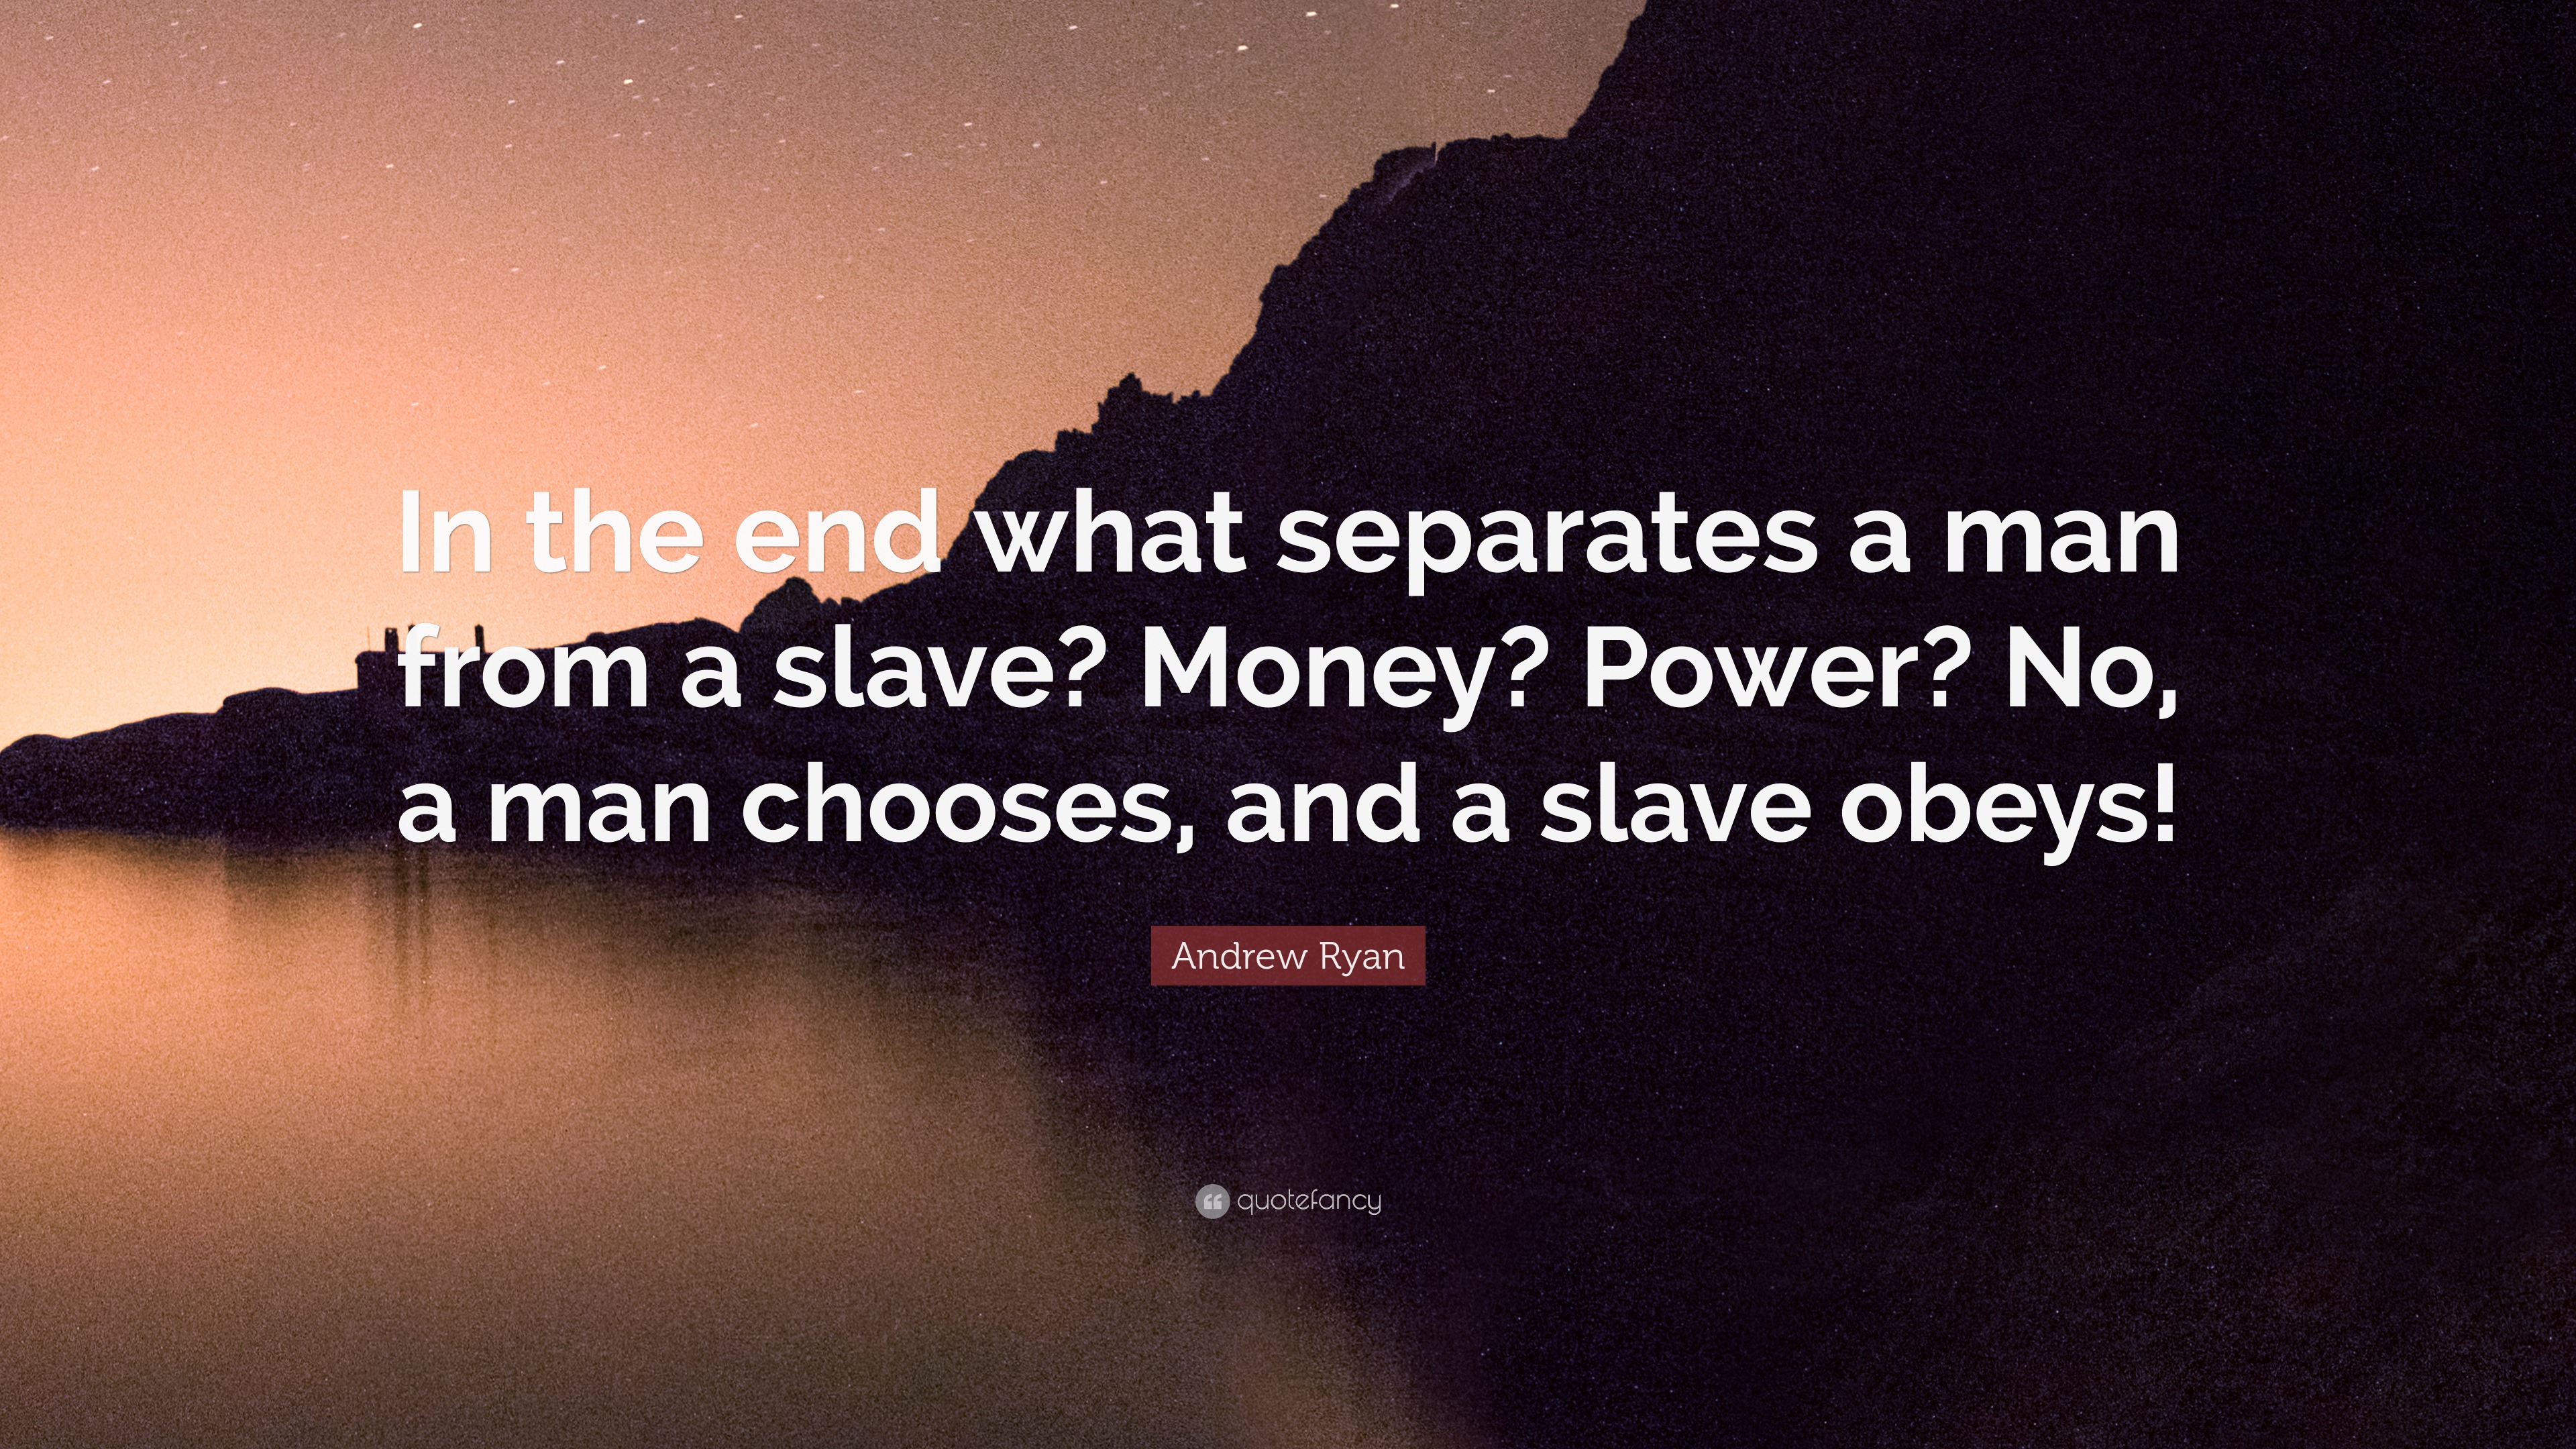 Andrew Ryan Quote: "In the end what separates a man from a slave? Money? Power? No, a man ...